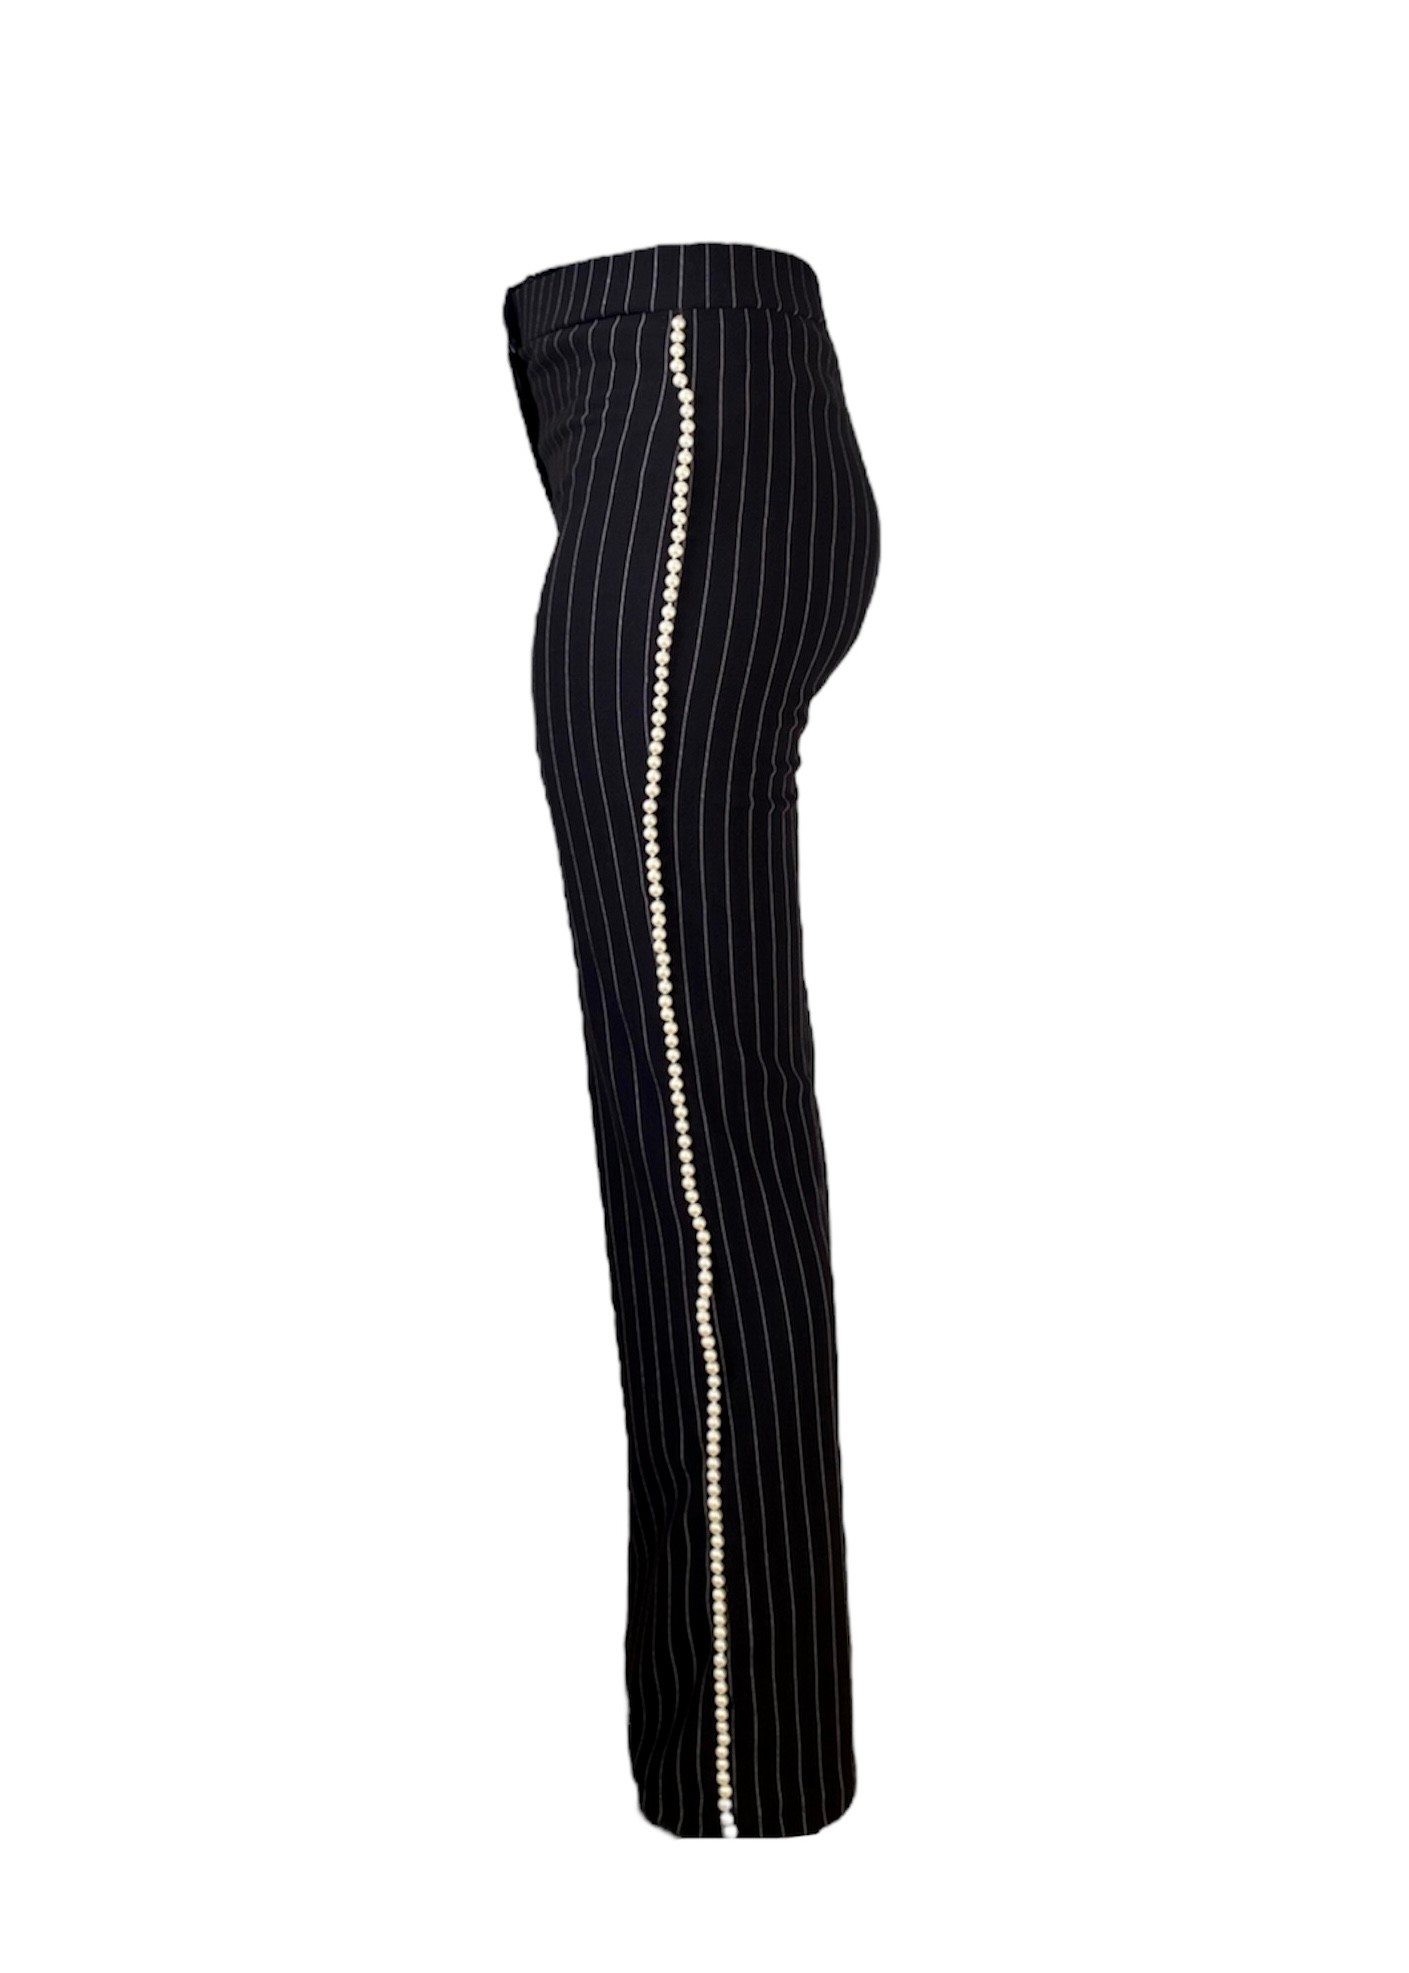 Black & White striped pants with pearl details on the sides and button 